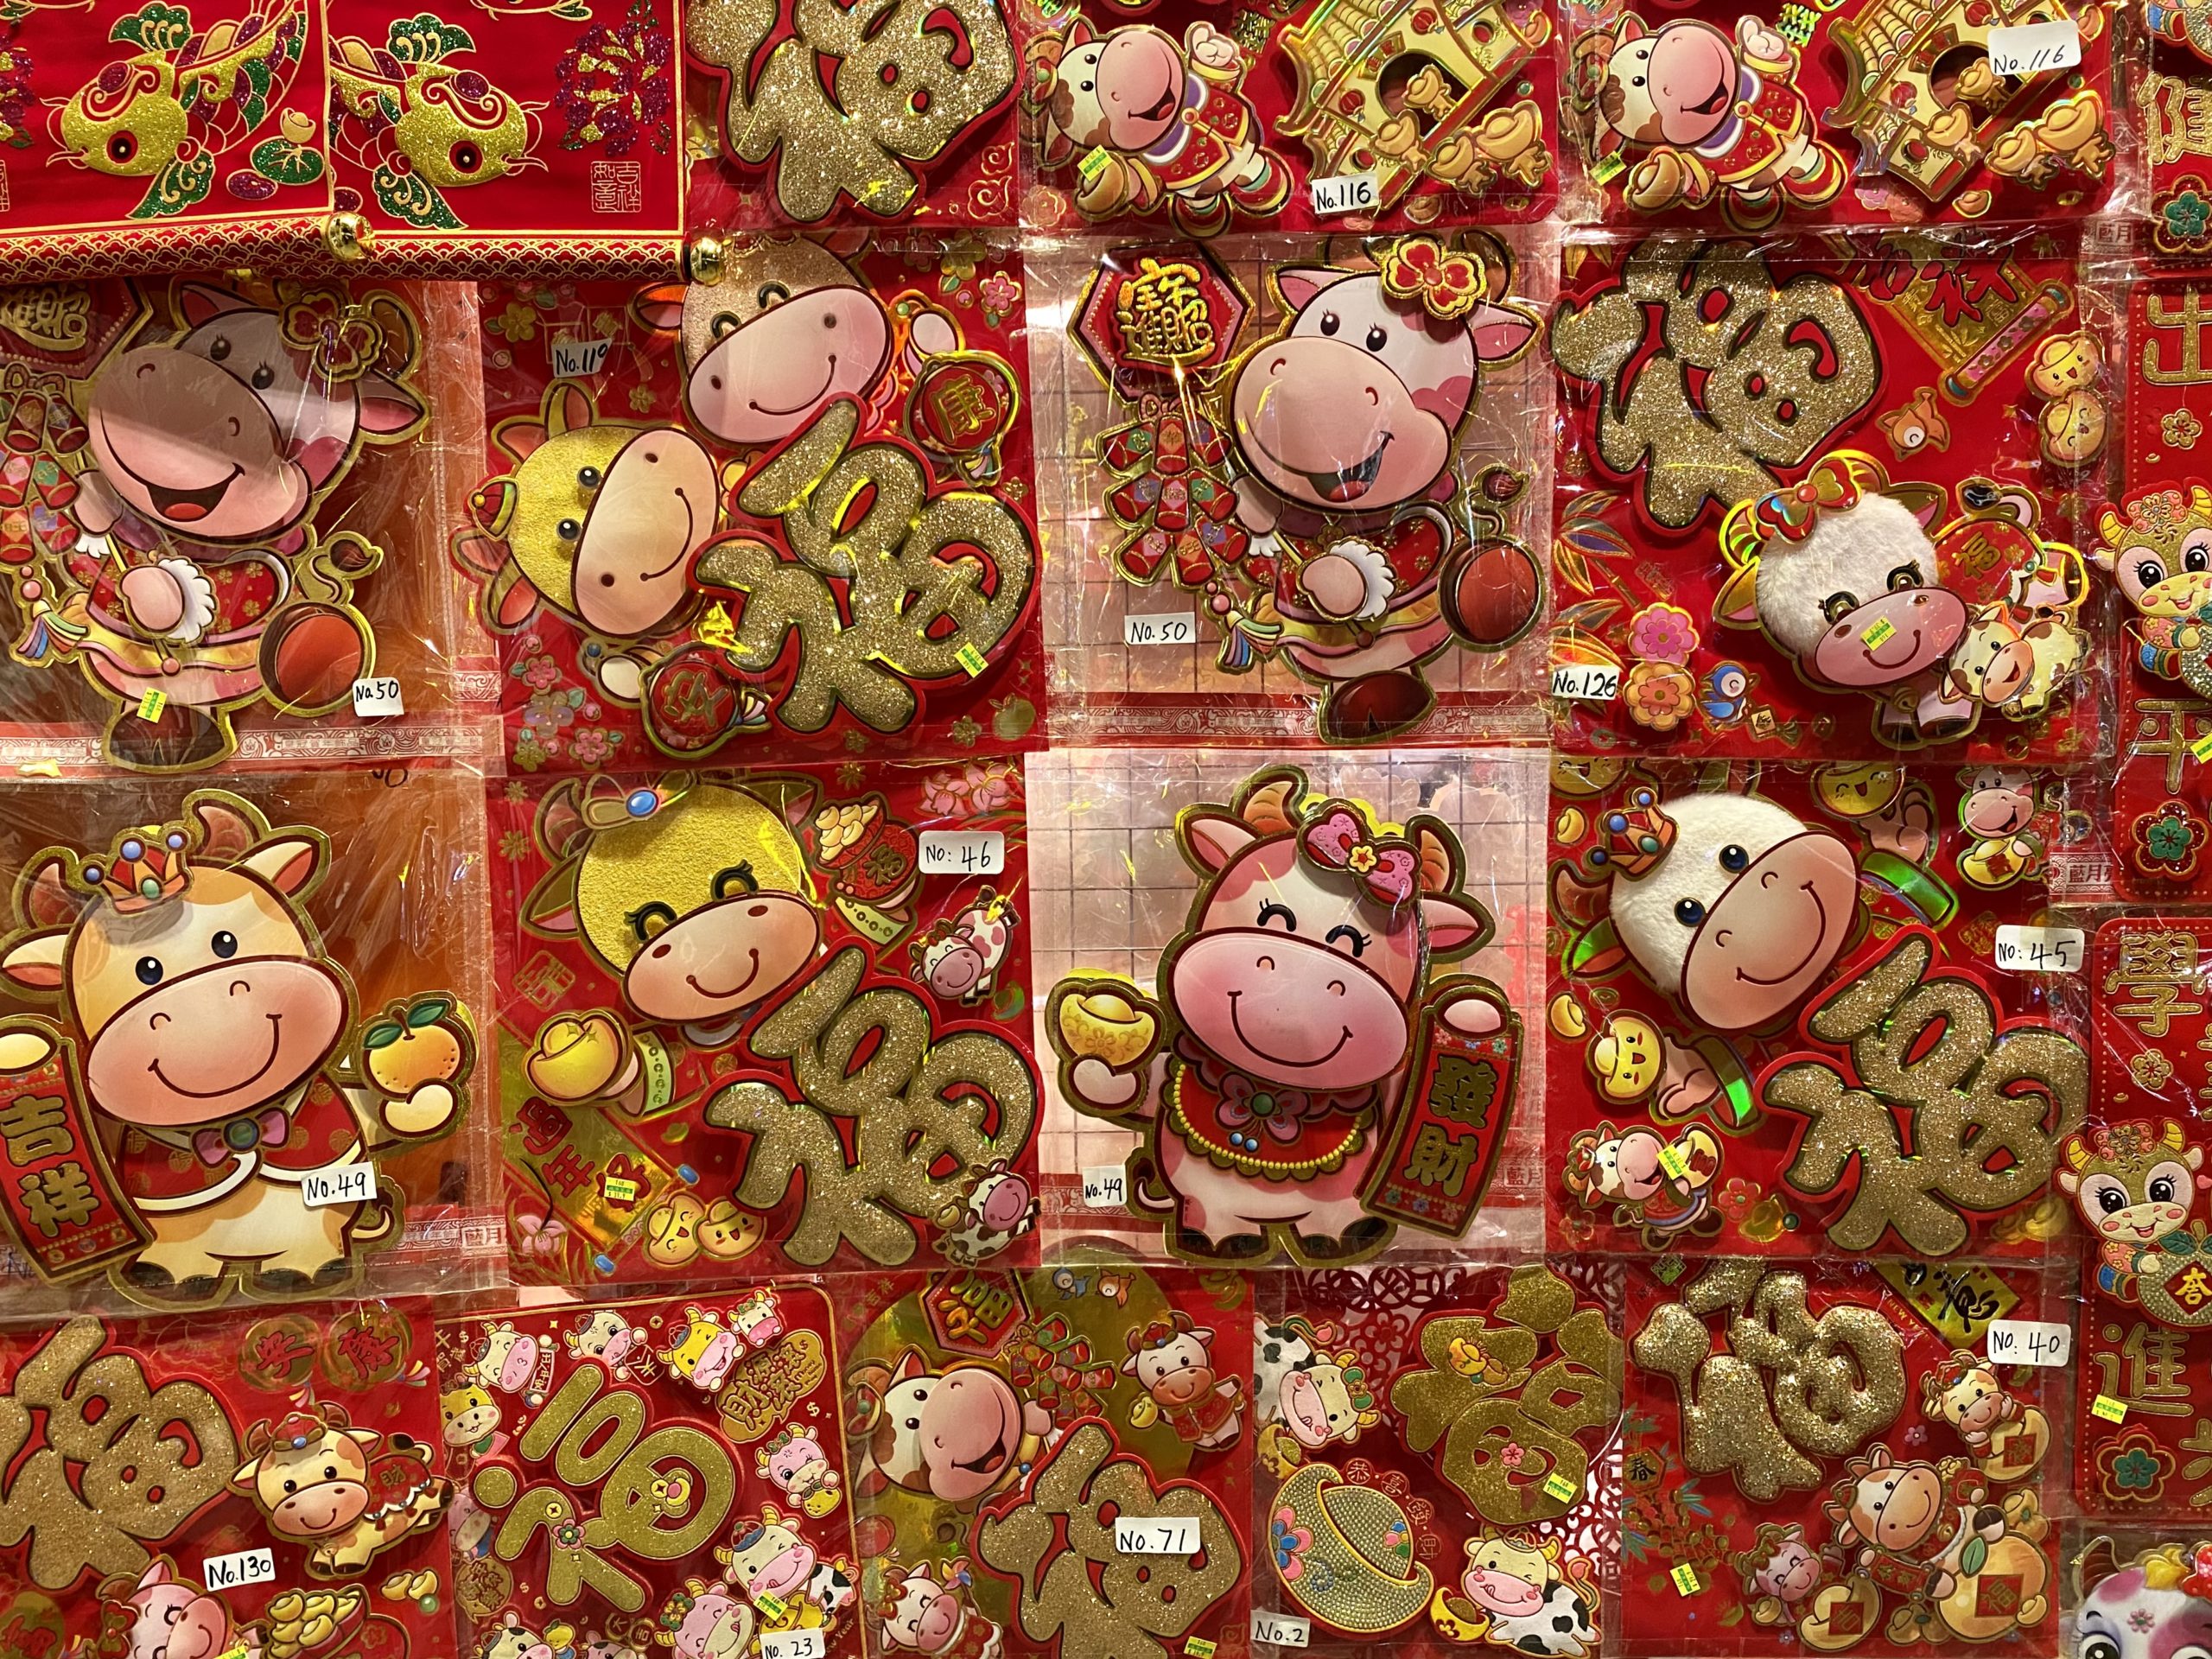 30 Chinese New Year Greetings And Wishes In Mandarin, Cantonese